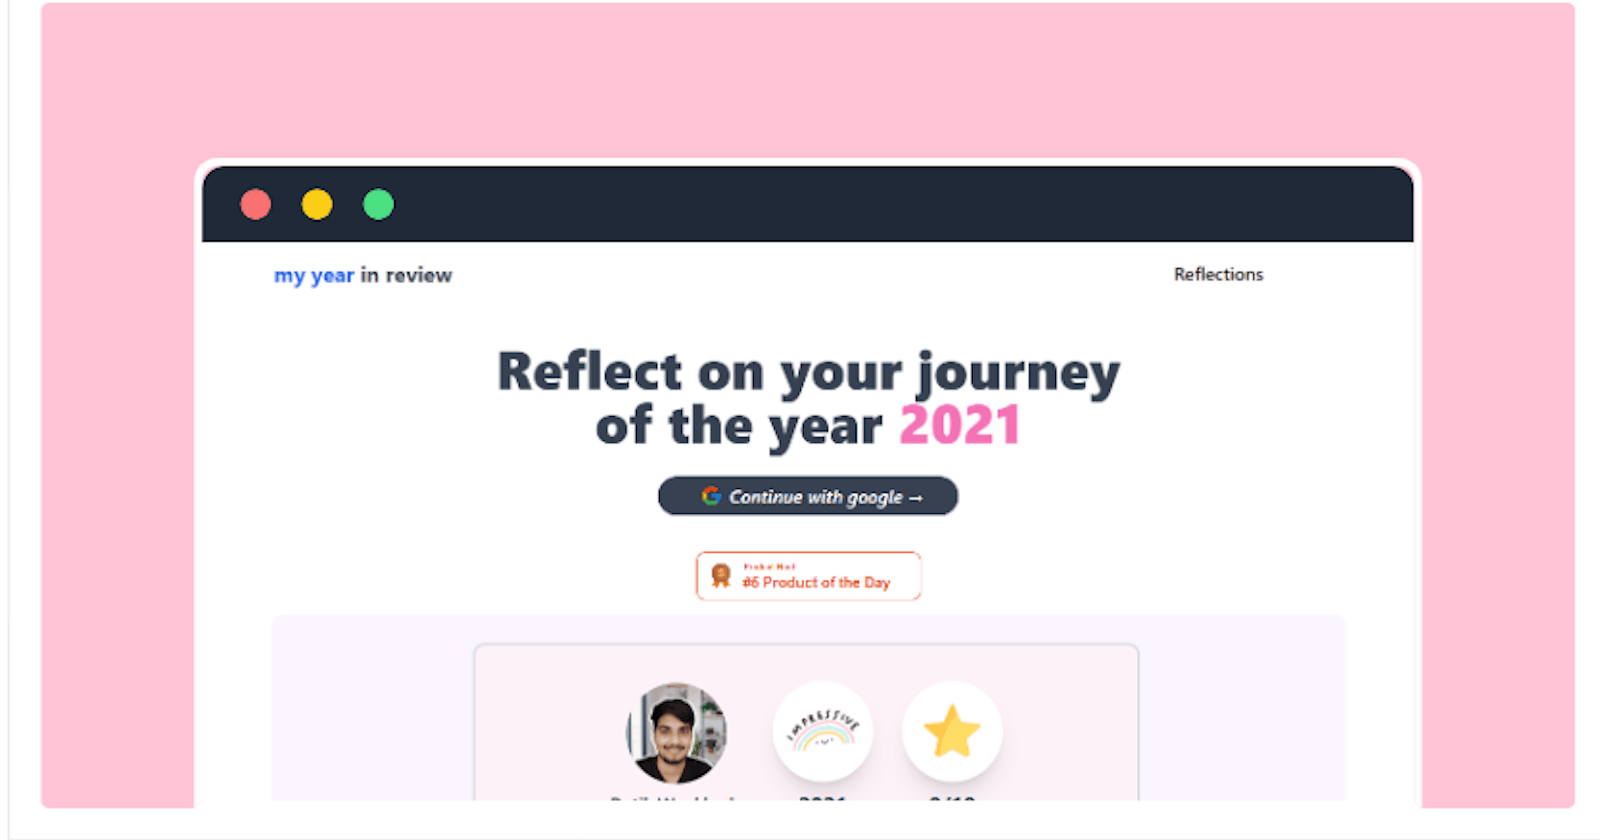 How I built an app to reflect on your year 2021